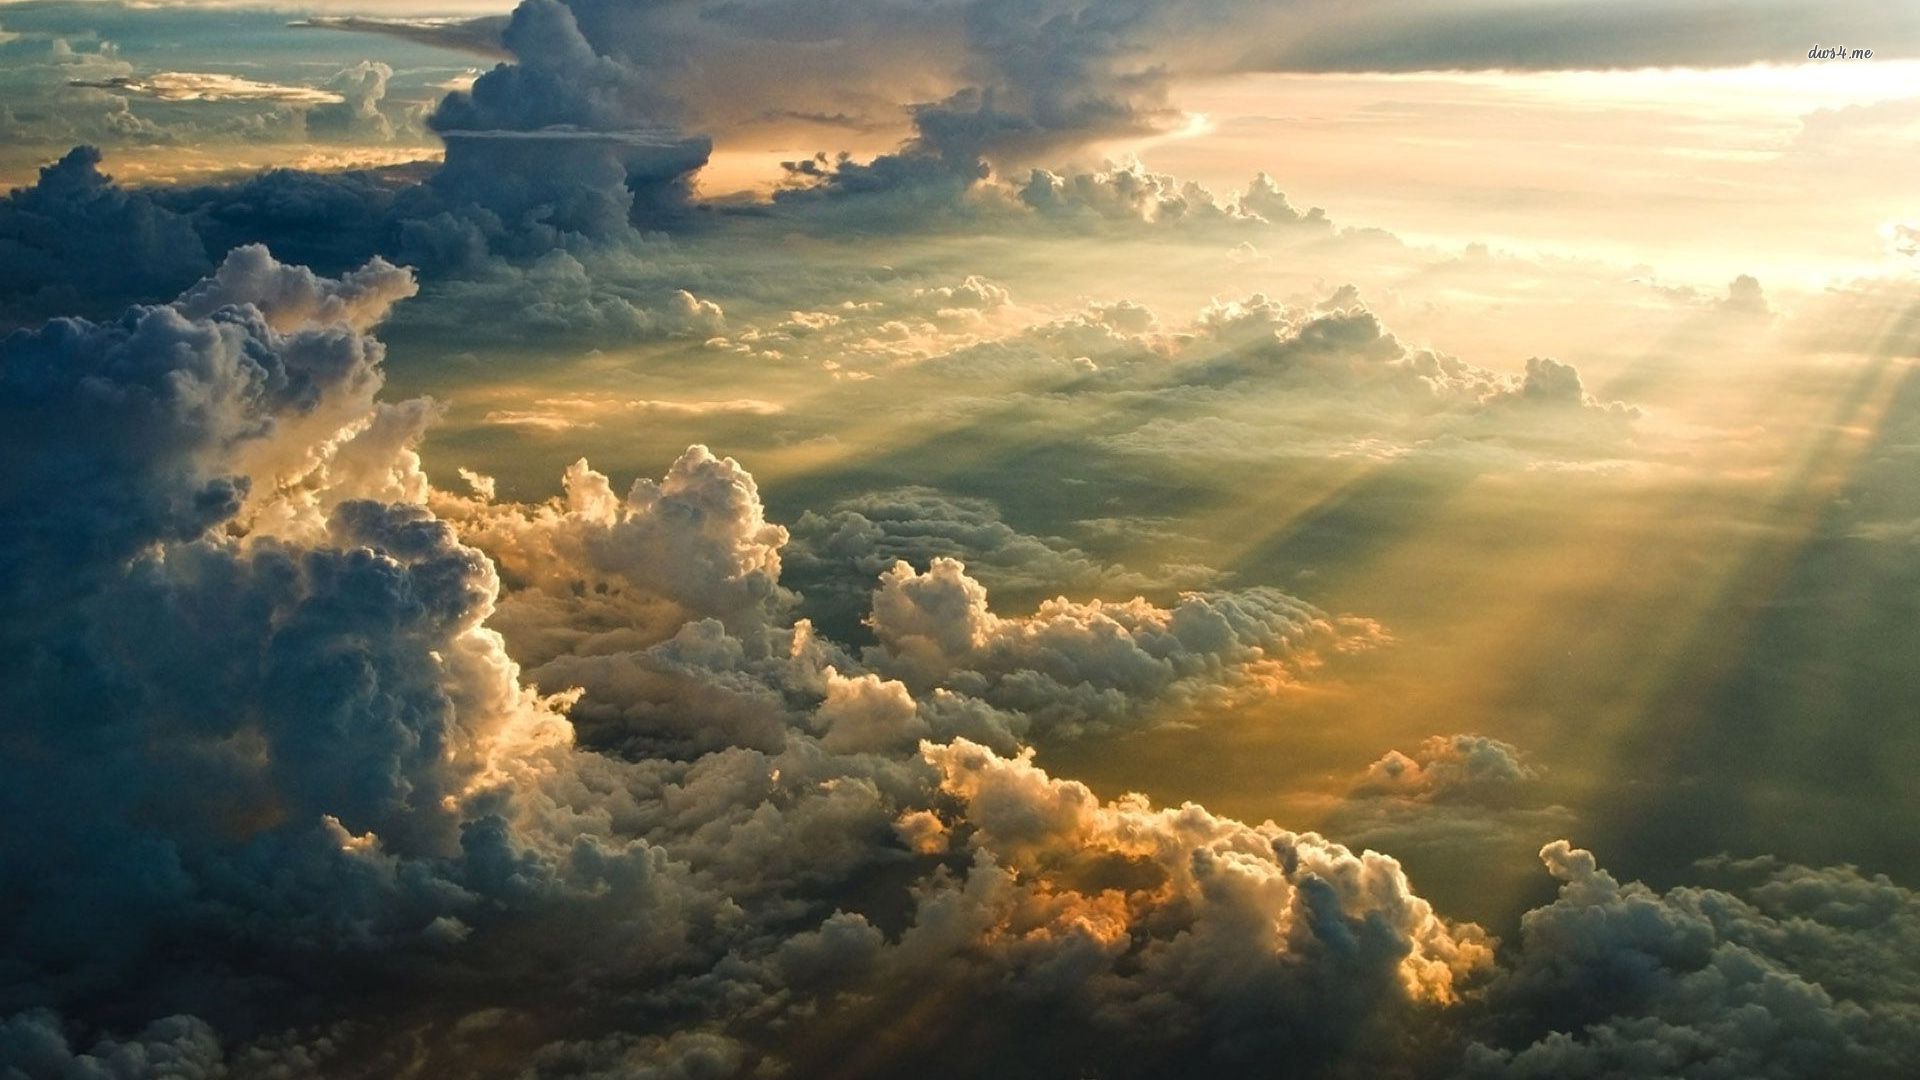 Collection of Clouds Wallpaper on HDWallpapers